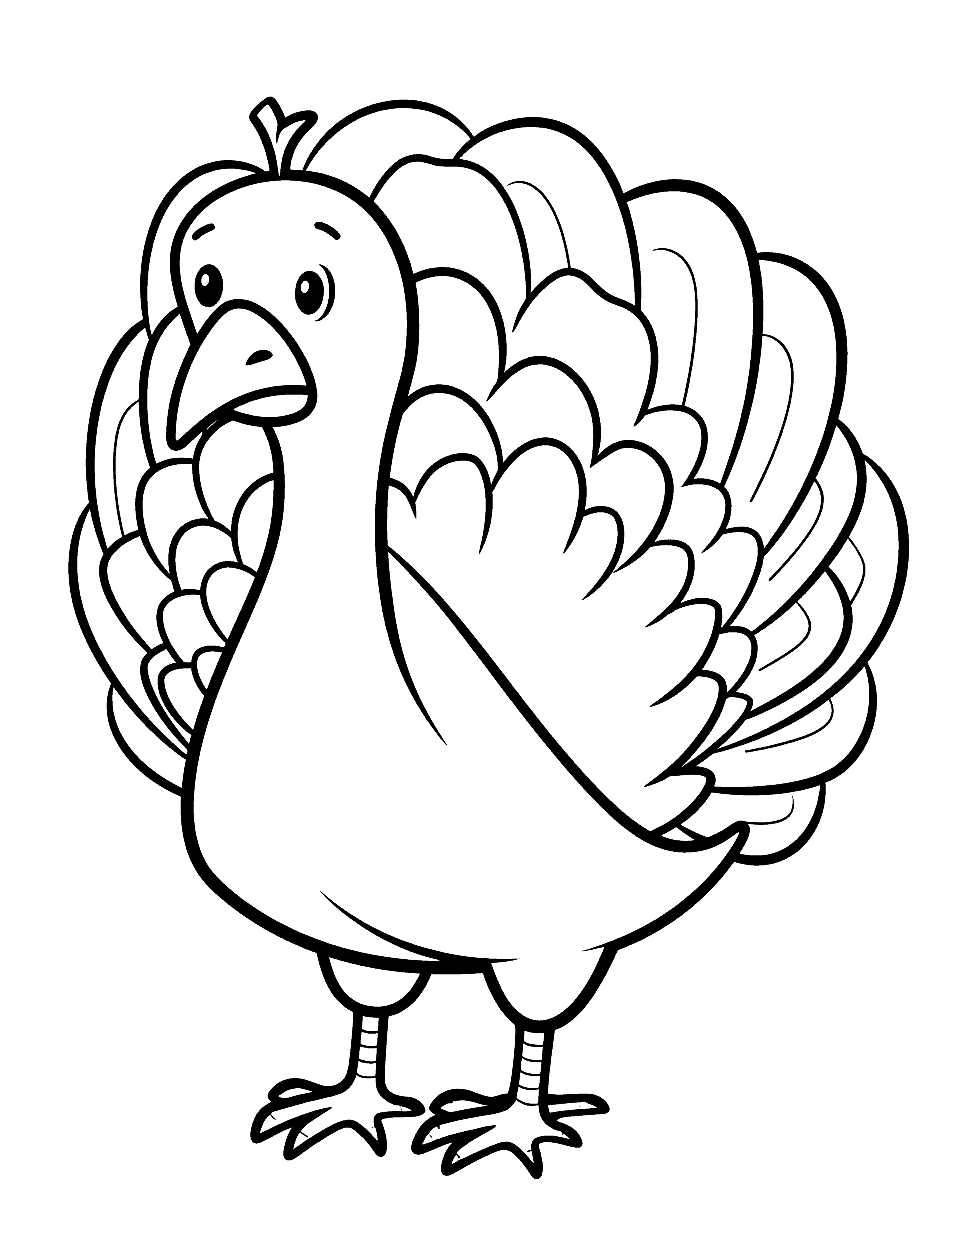 Confused Turkey Coloring Page - A turkey with a confused look on its face.